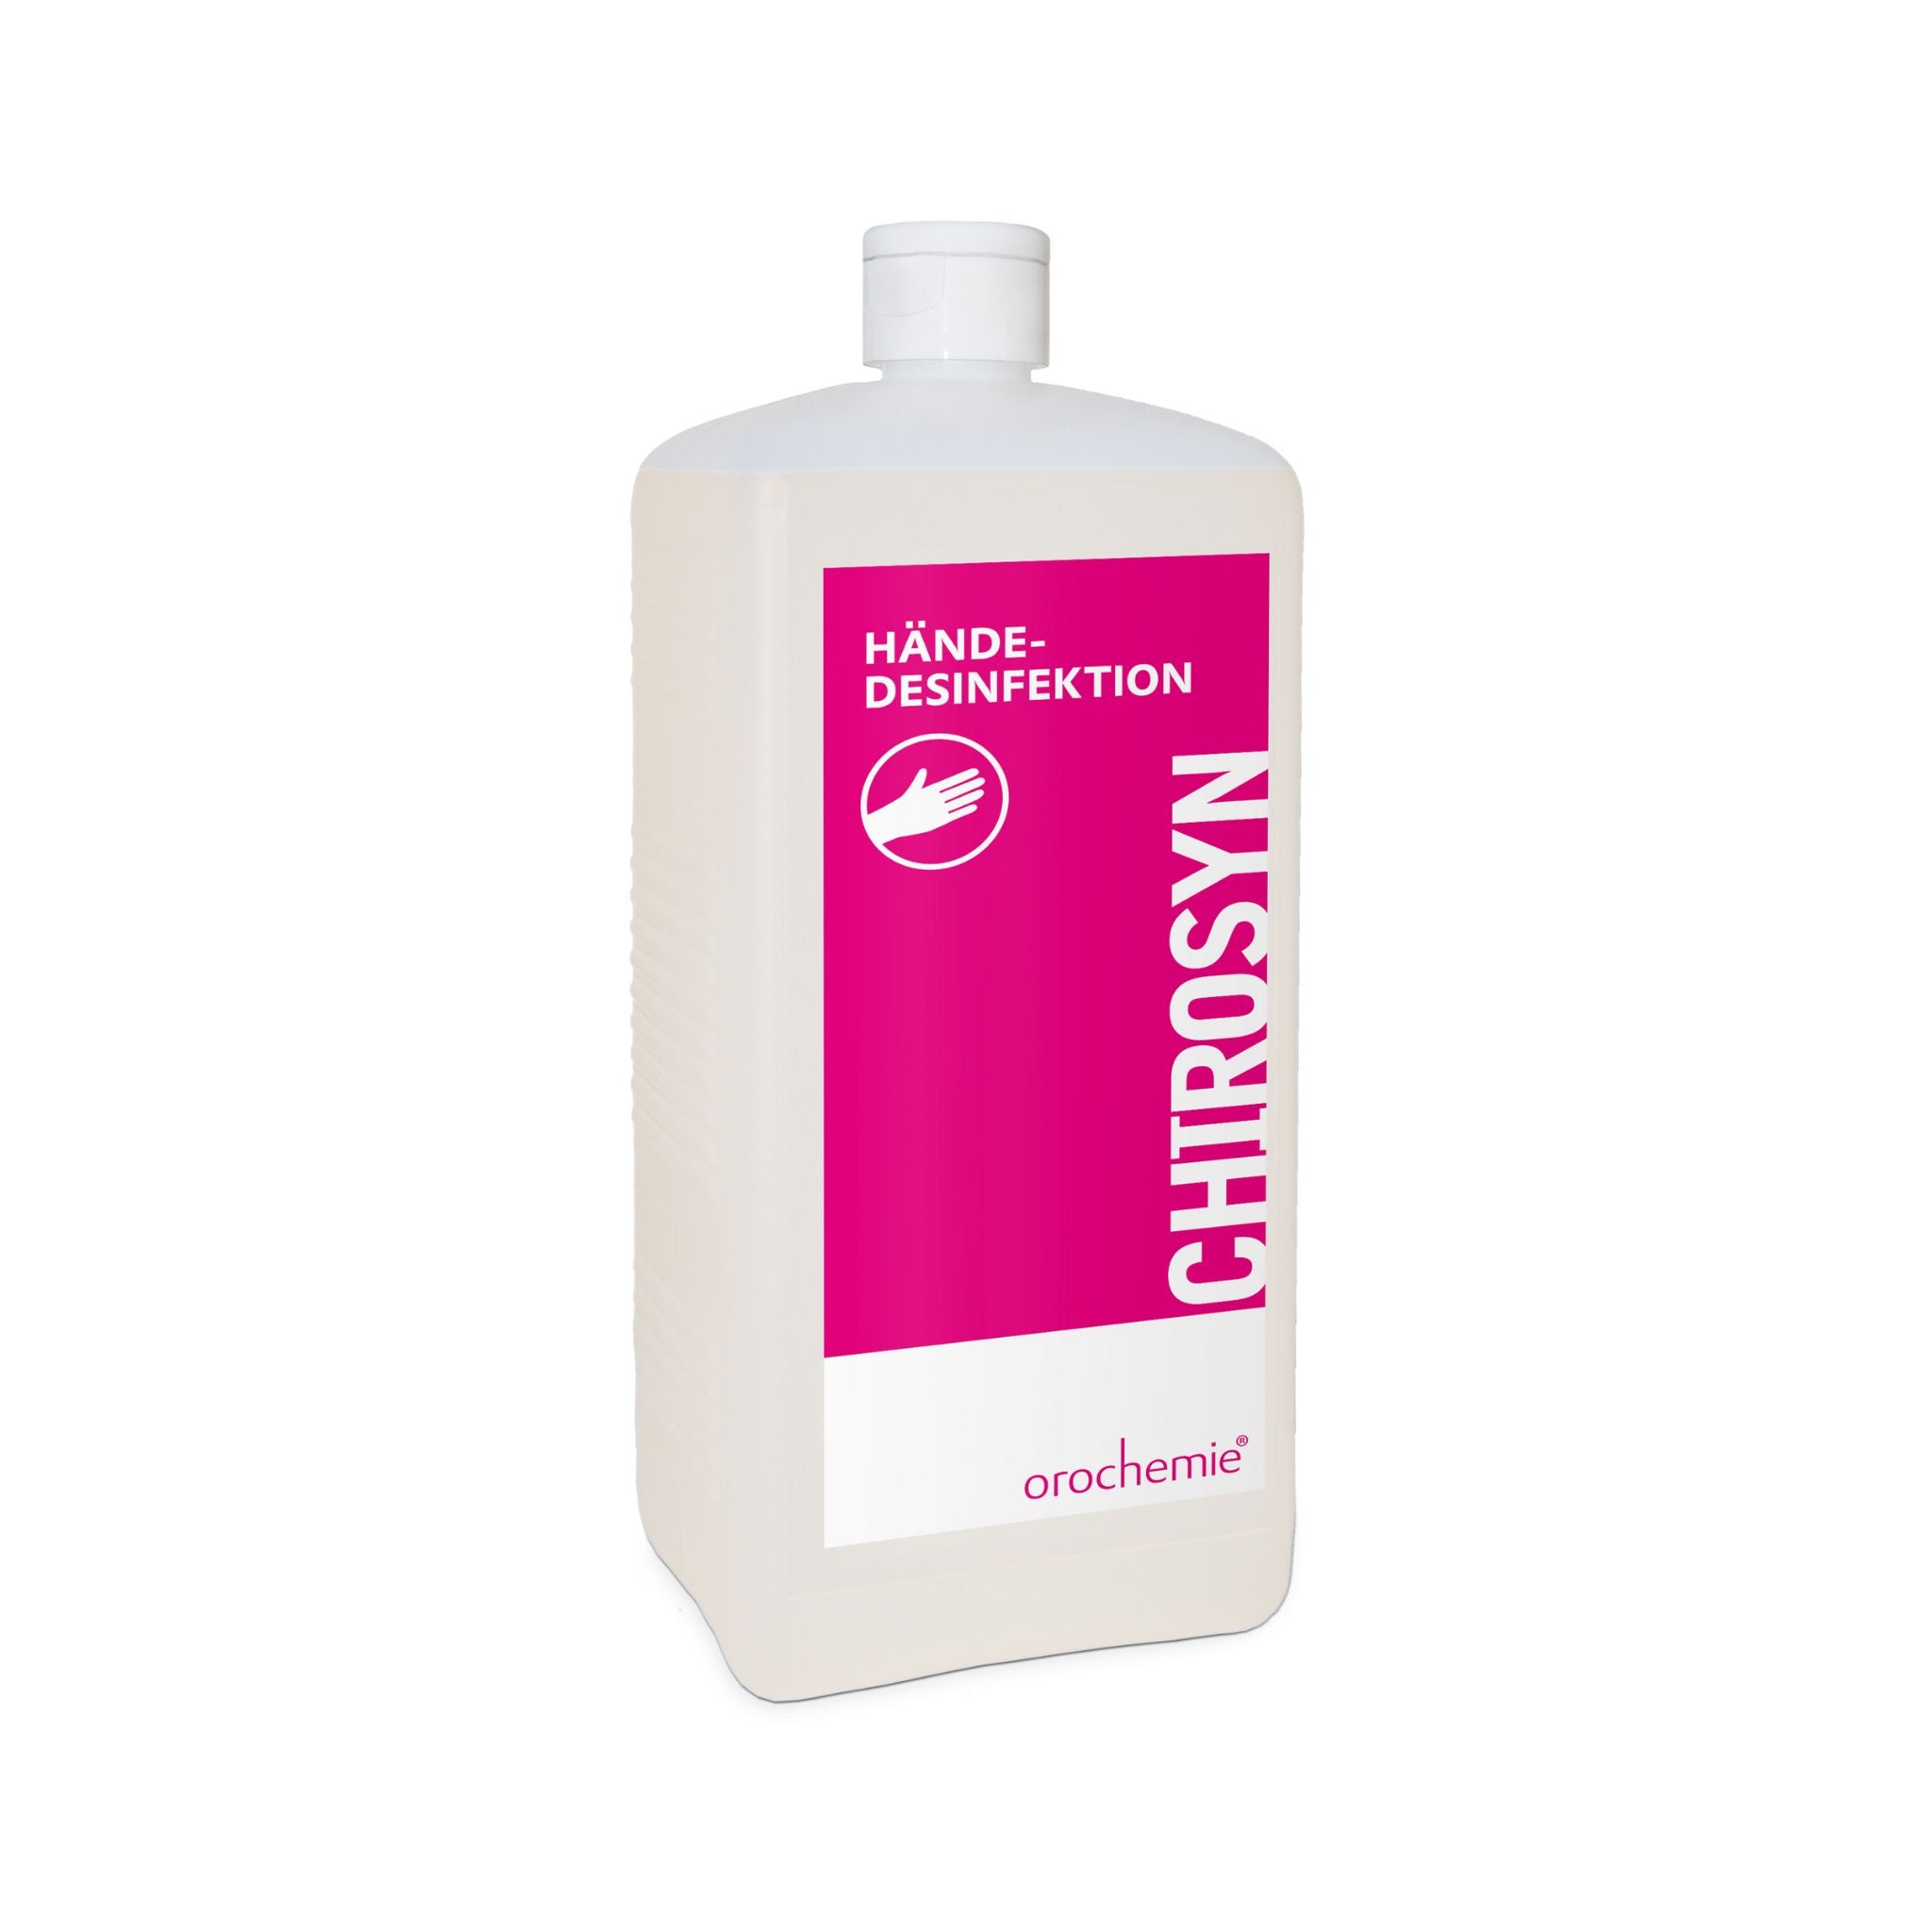 orochemie Chirosyn hand disinfection